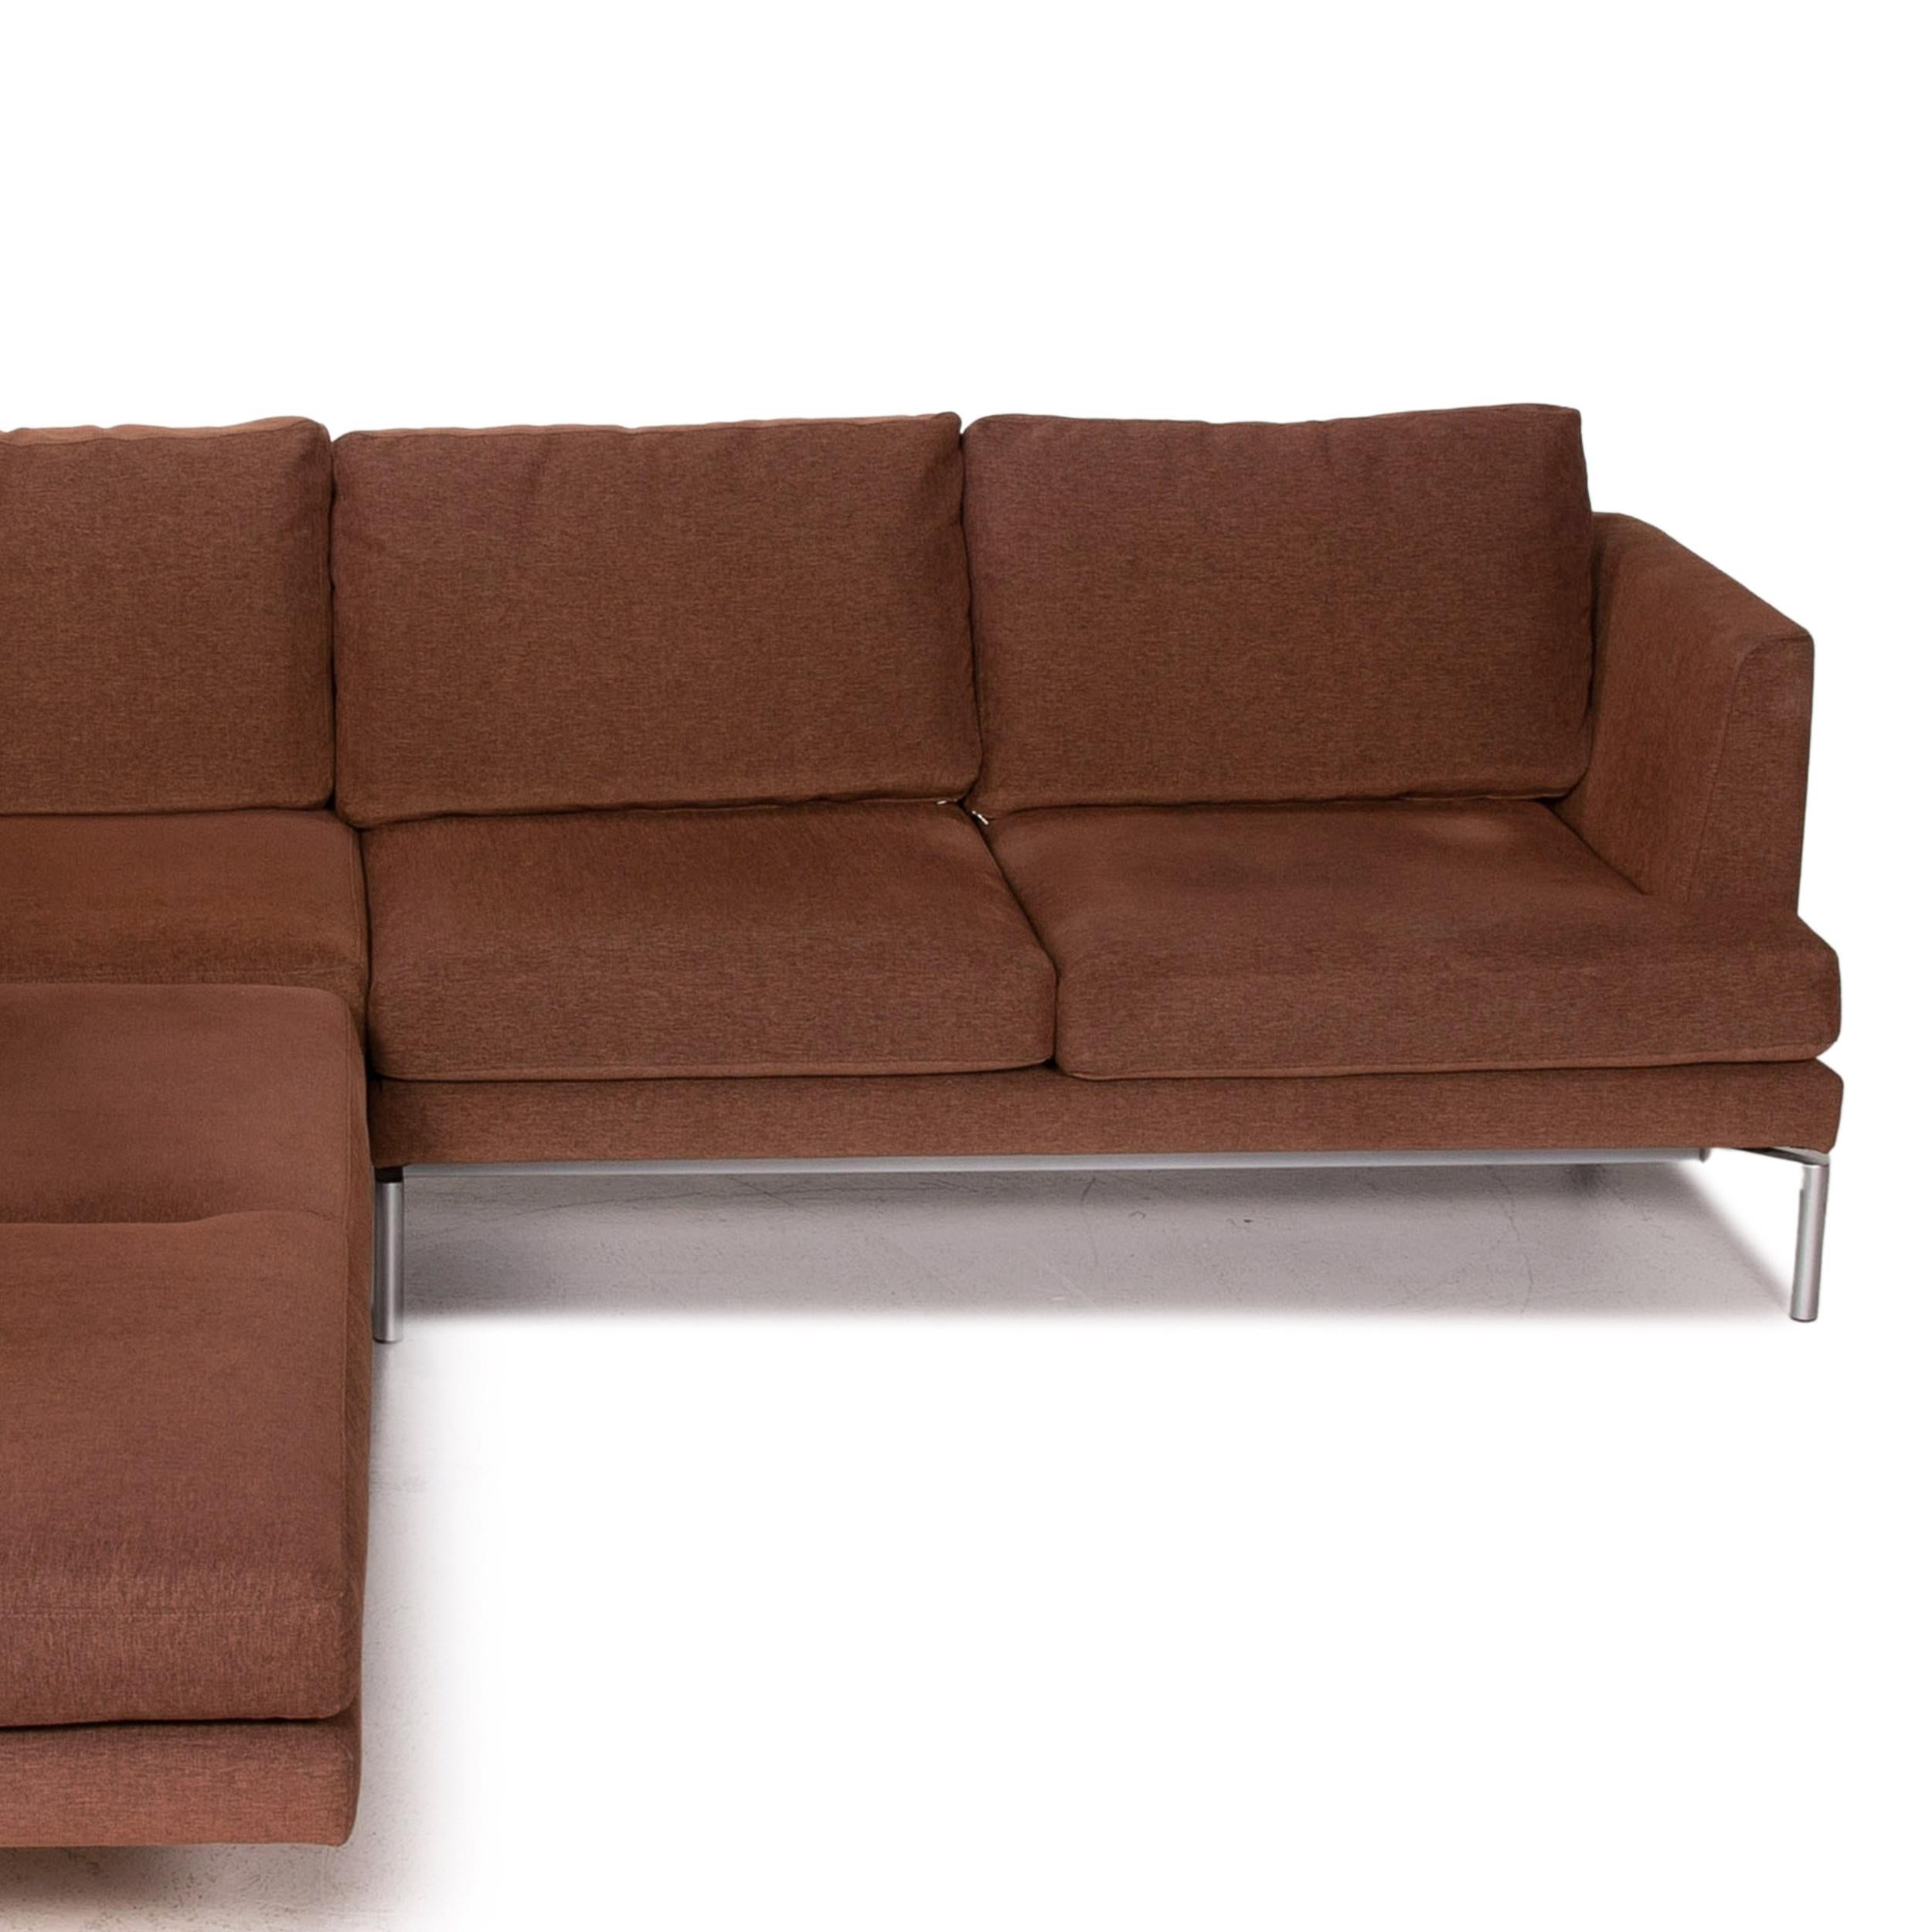 Walter Knoll Good Times Fabric Corner Sofa Brown Function Couch 2